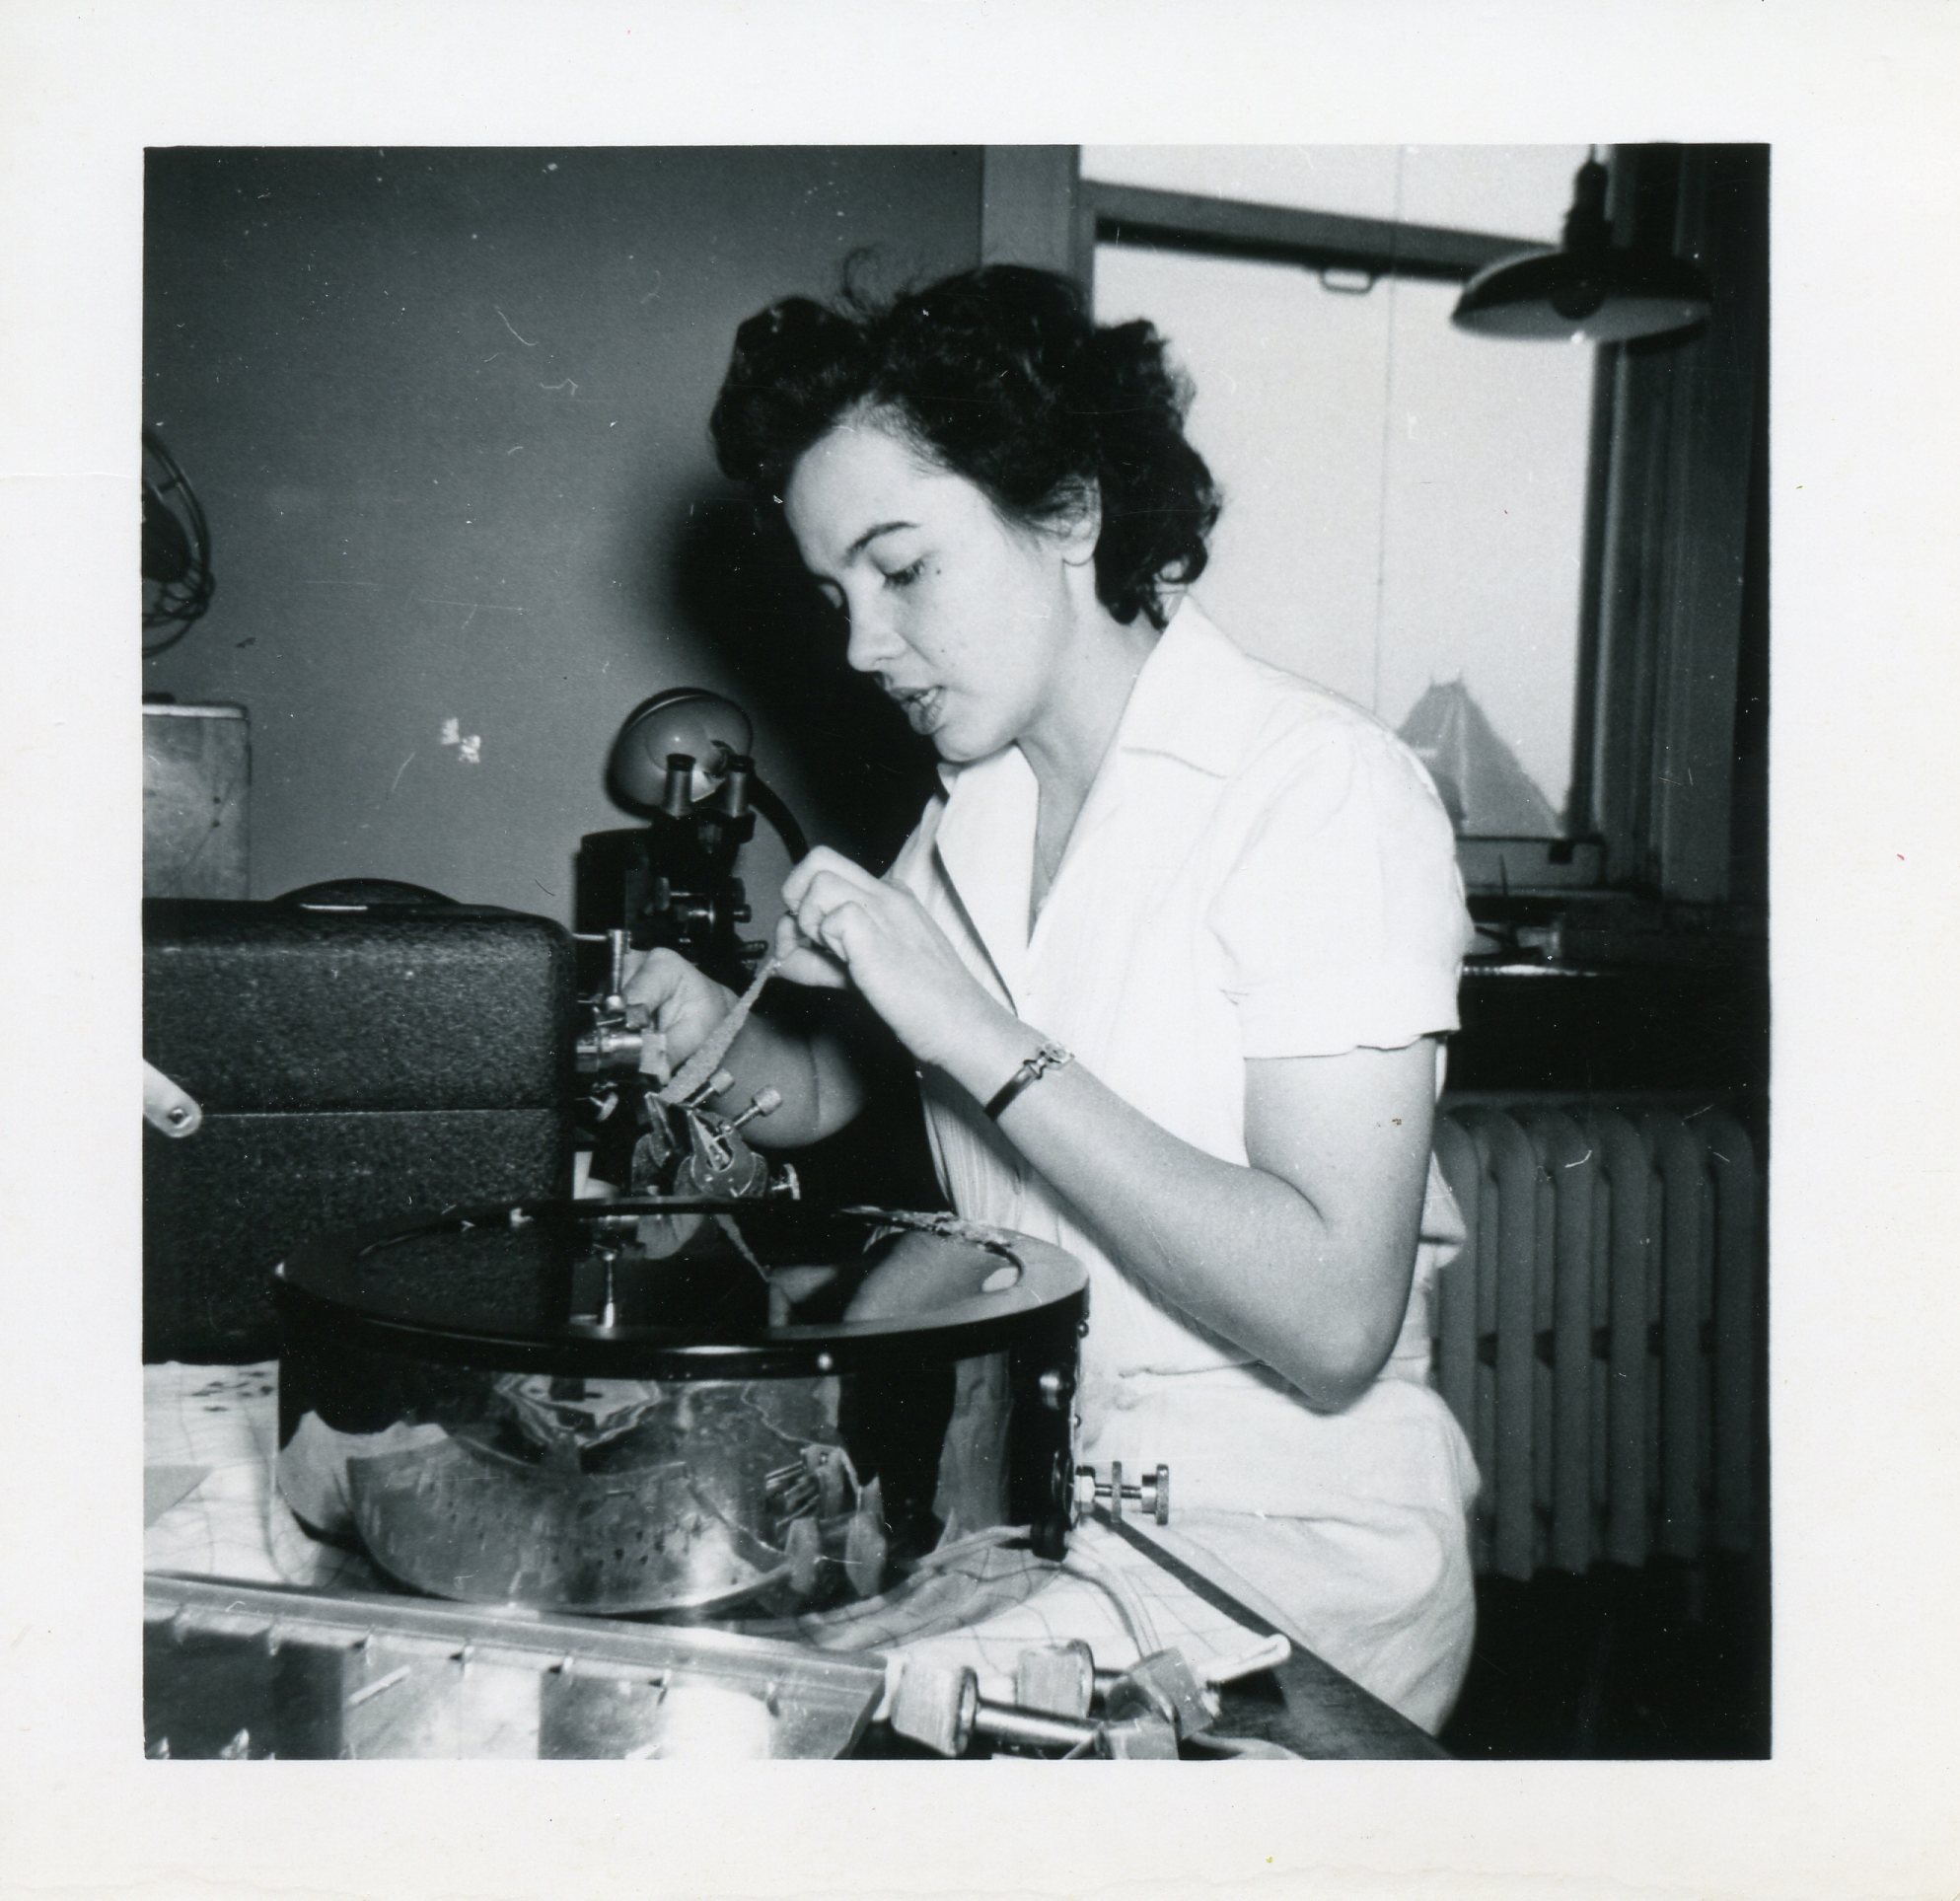 A black and white photo of a woman in a lab-coat checks on scientific equipment.